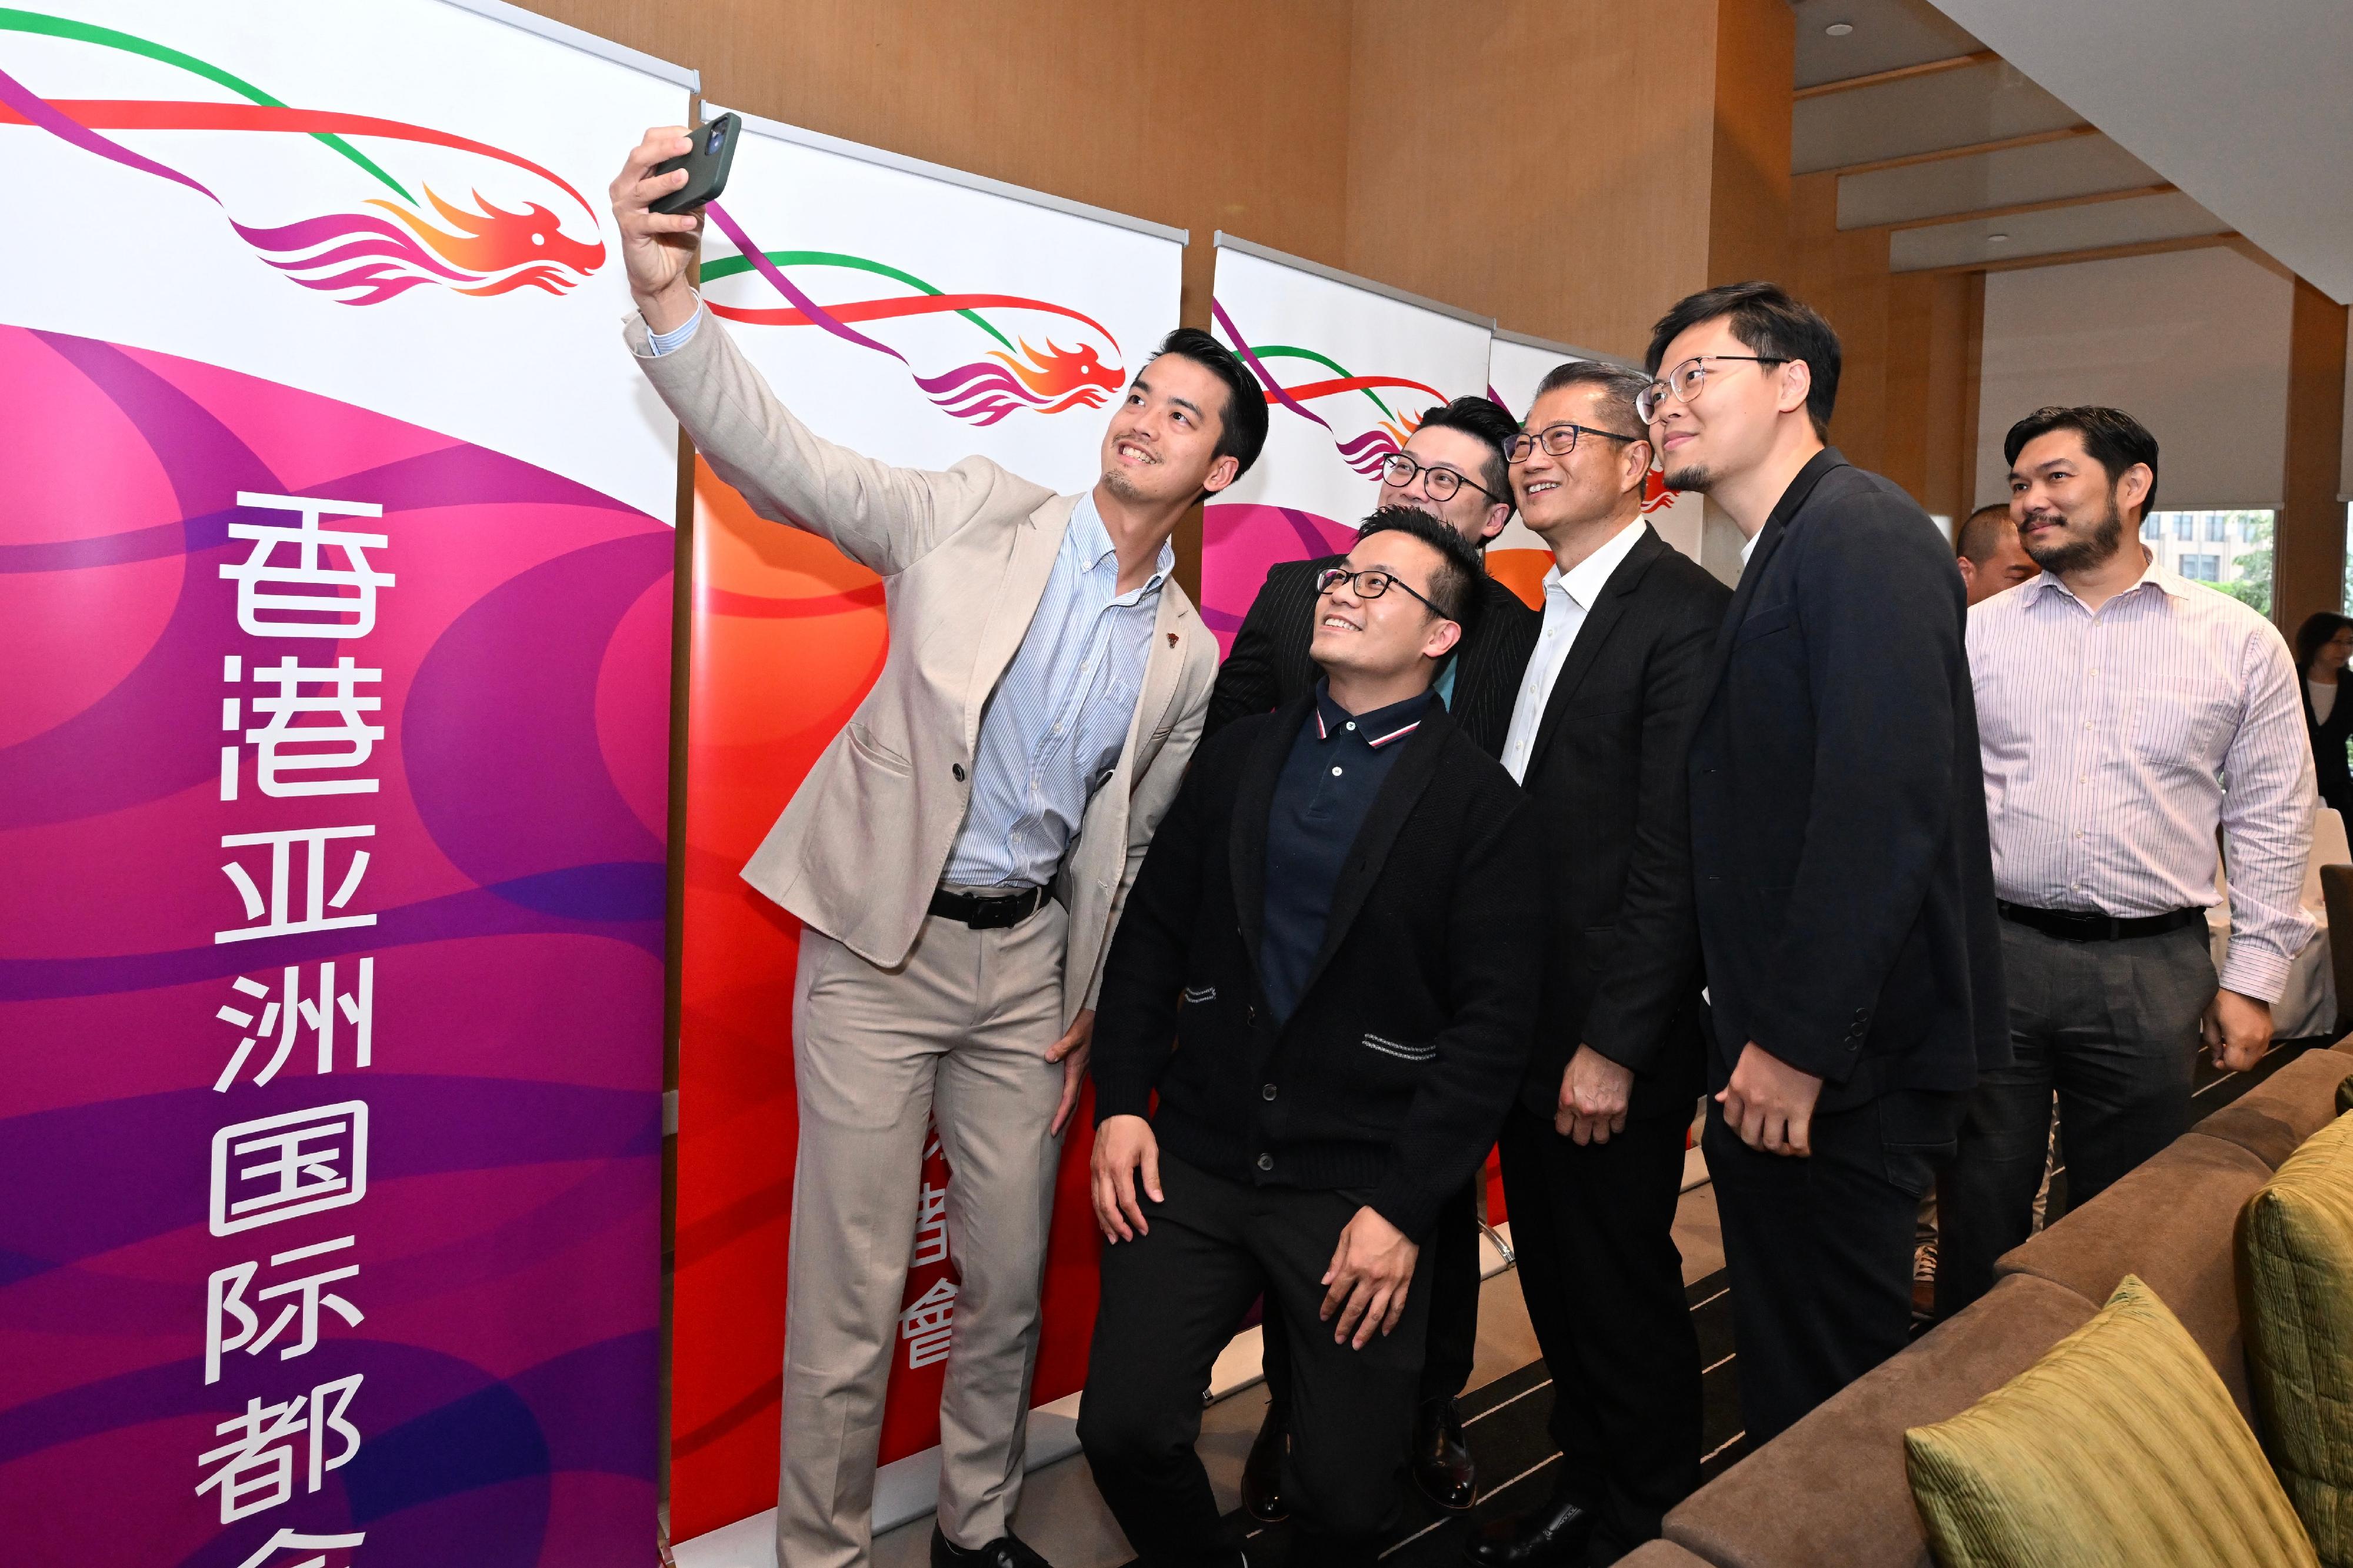 The Financial Secretary, Mr Paul Chan, meets with the Hong Kong young entrepreneurs in Guangzhou today (March 15) and exchanges views with them. Photo shows Mr Chan (third right) taking a selfie with the Hong Kong young entrepreneurs.